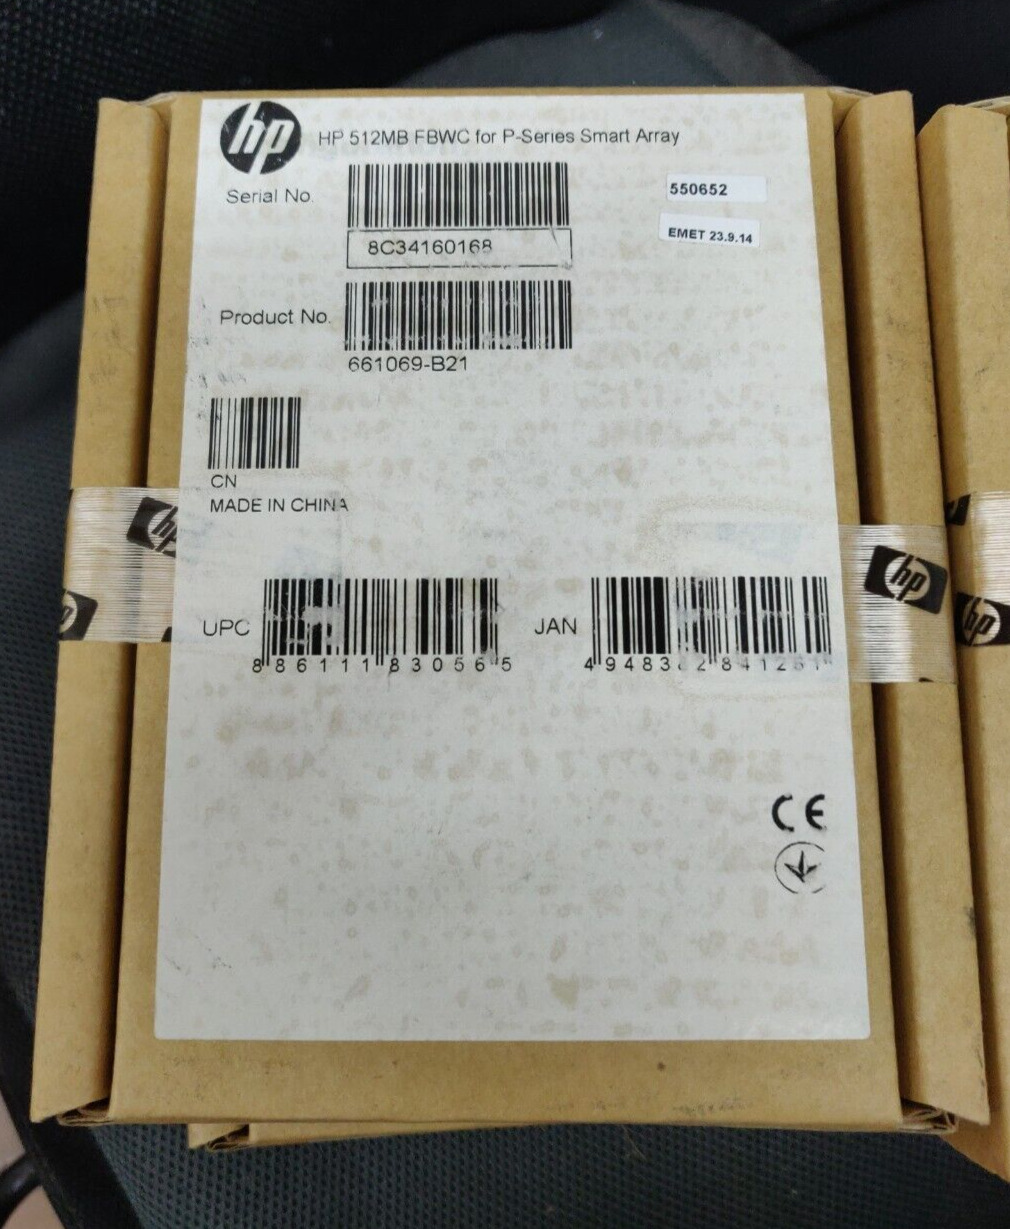 HP 661069-B21 G8 Series 512MB FBWC for P-series Smart Array - NEW in Box